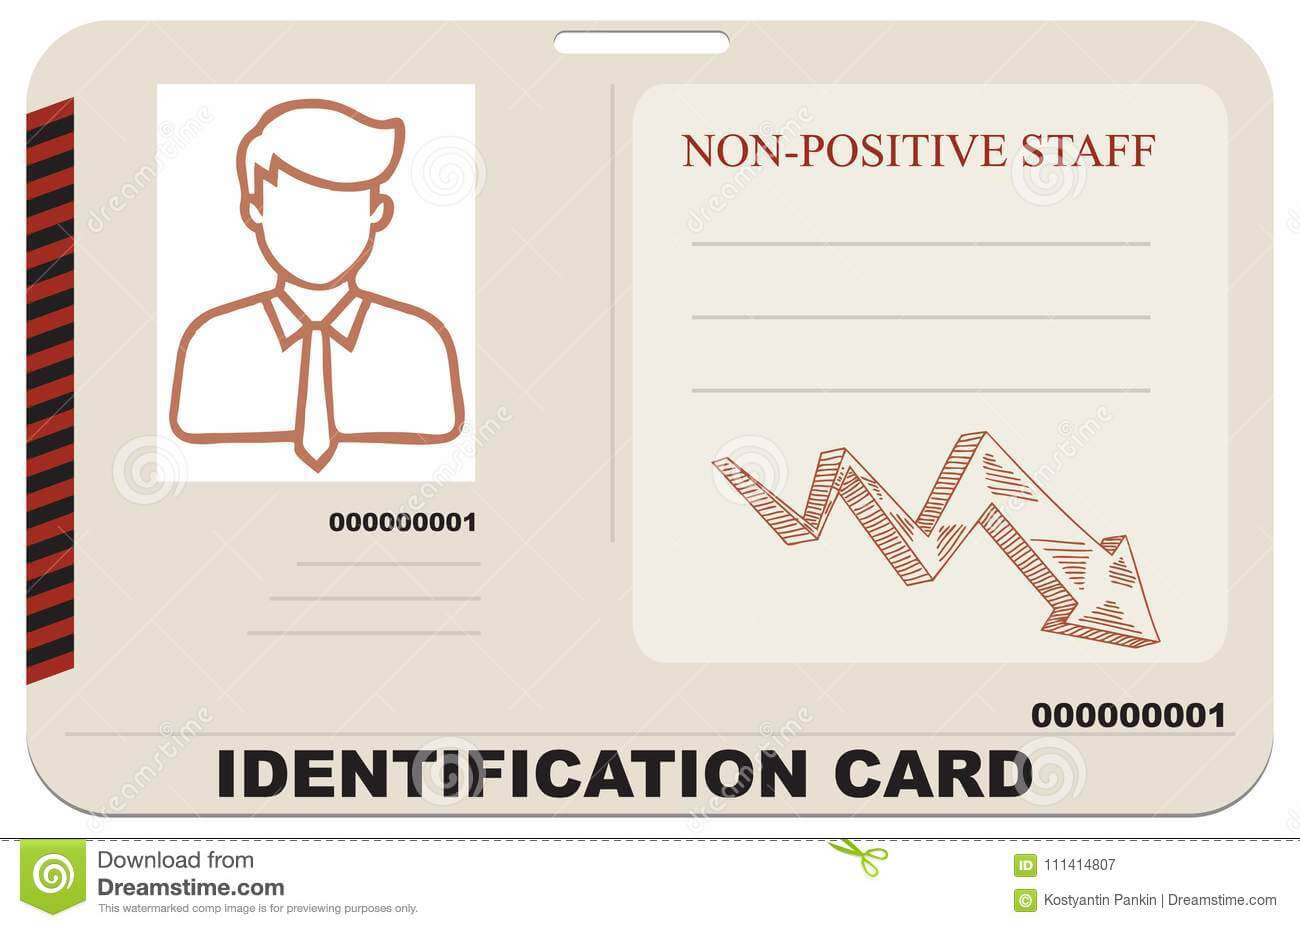 Identification Card For Non Positive Staff Stock Vector In Mi6 Id Card Template